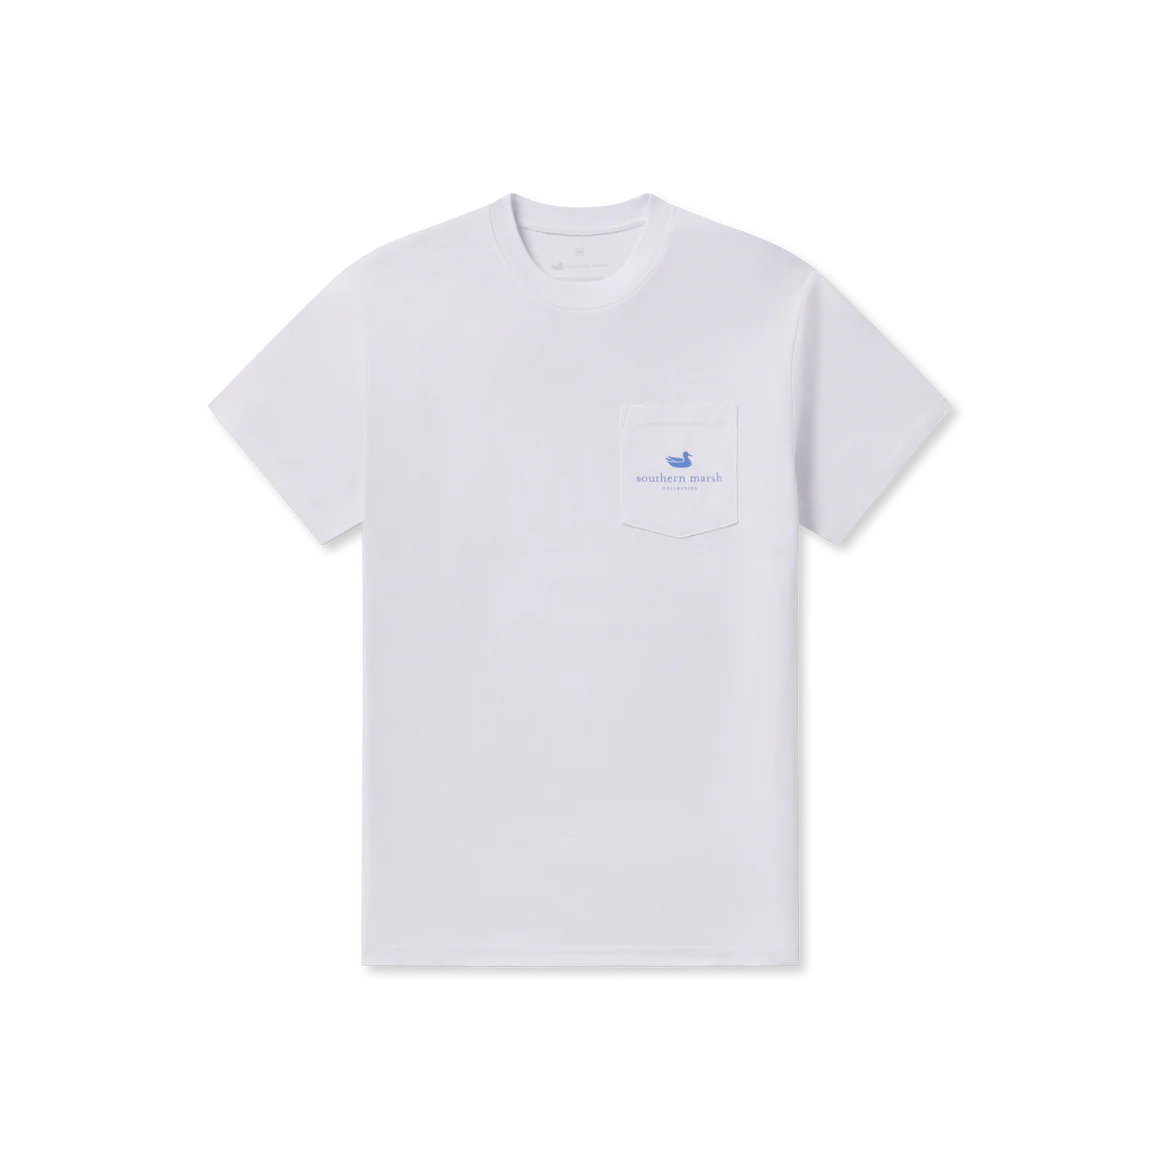 SOUTHERN MARSH COLLECTION Men's Tees WHITE / S AD76WHT